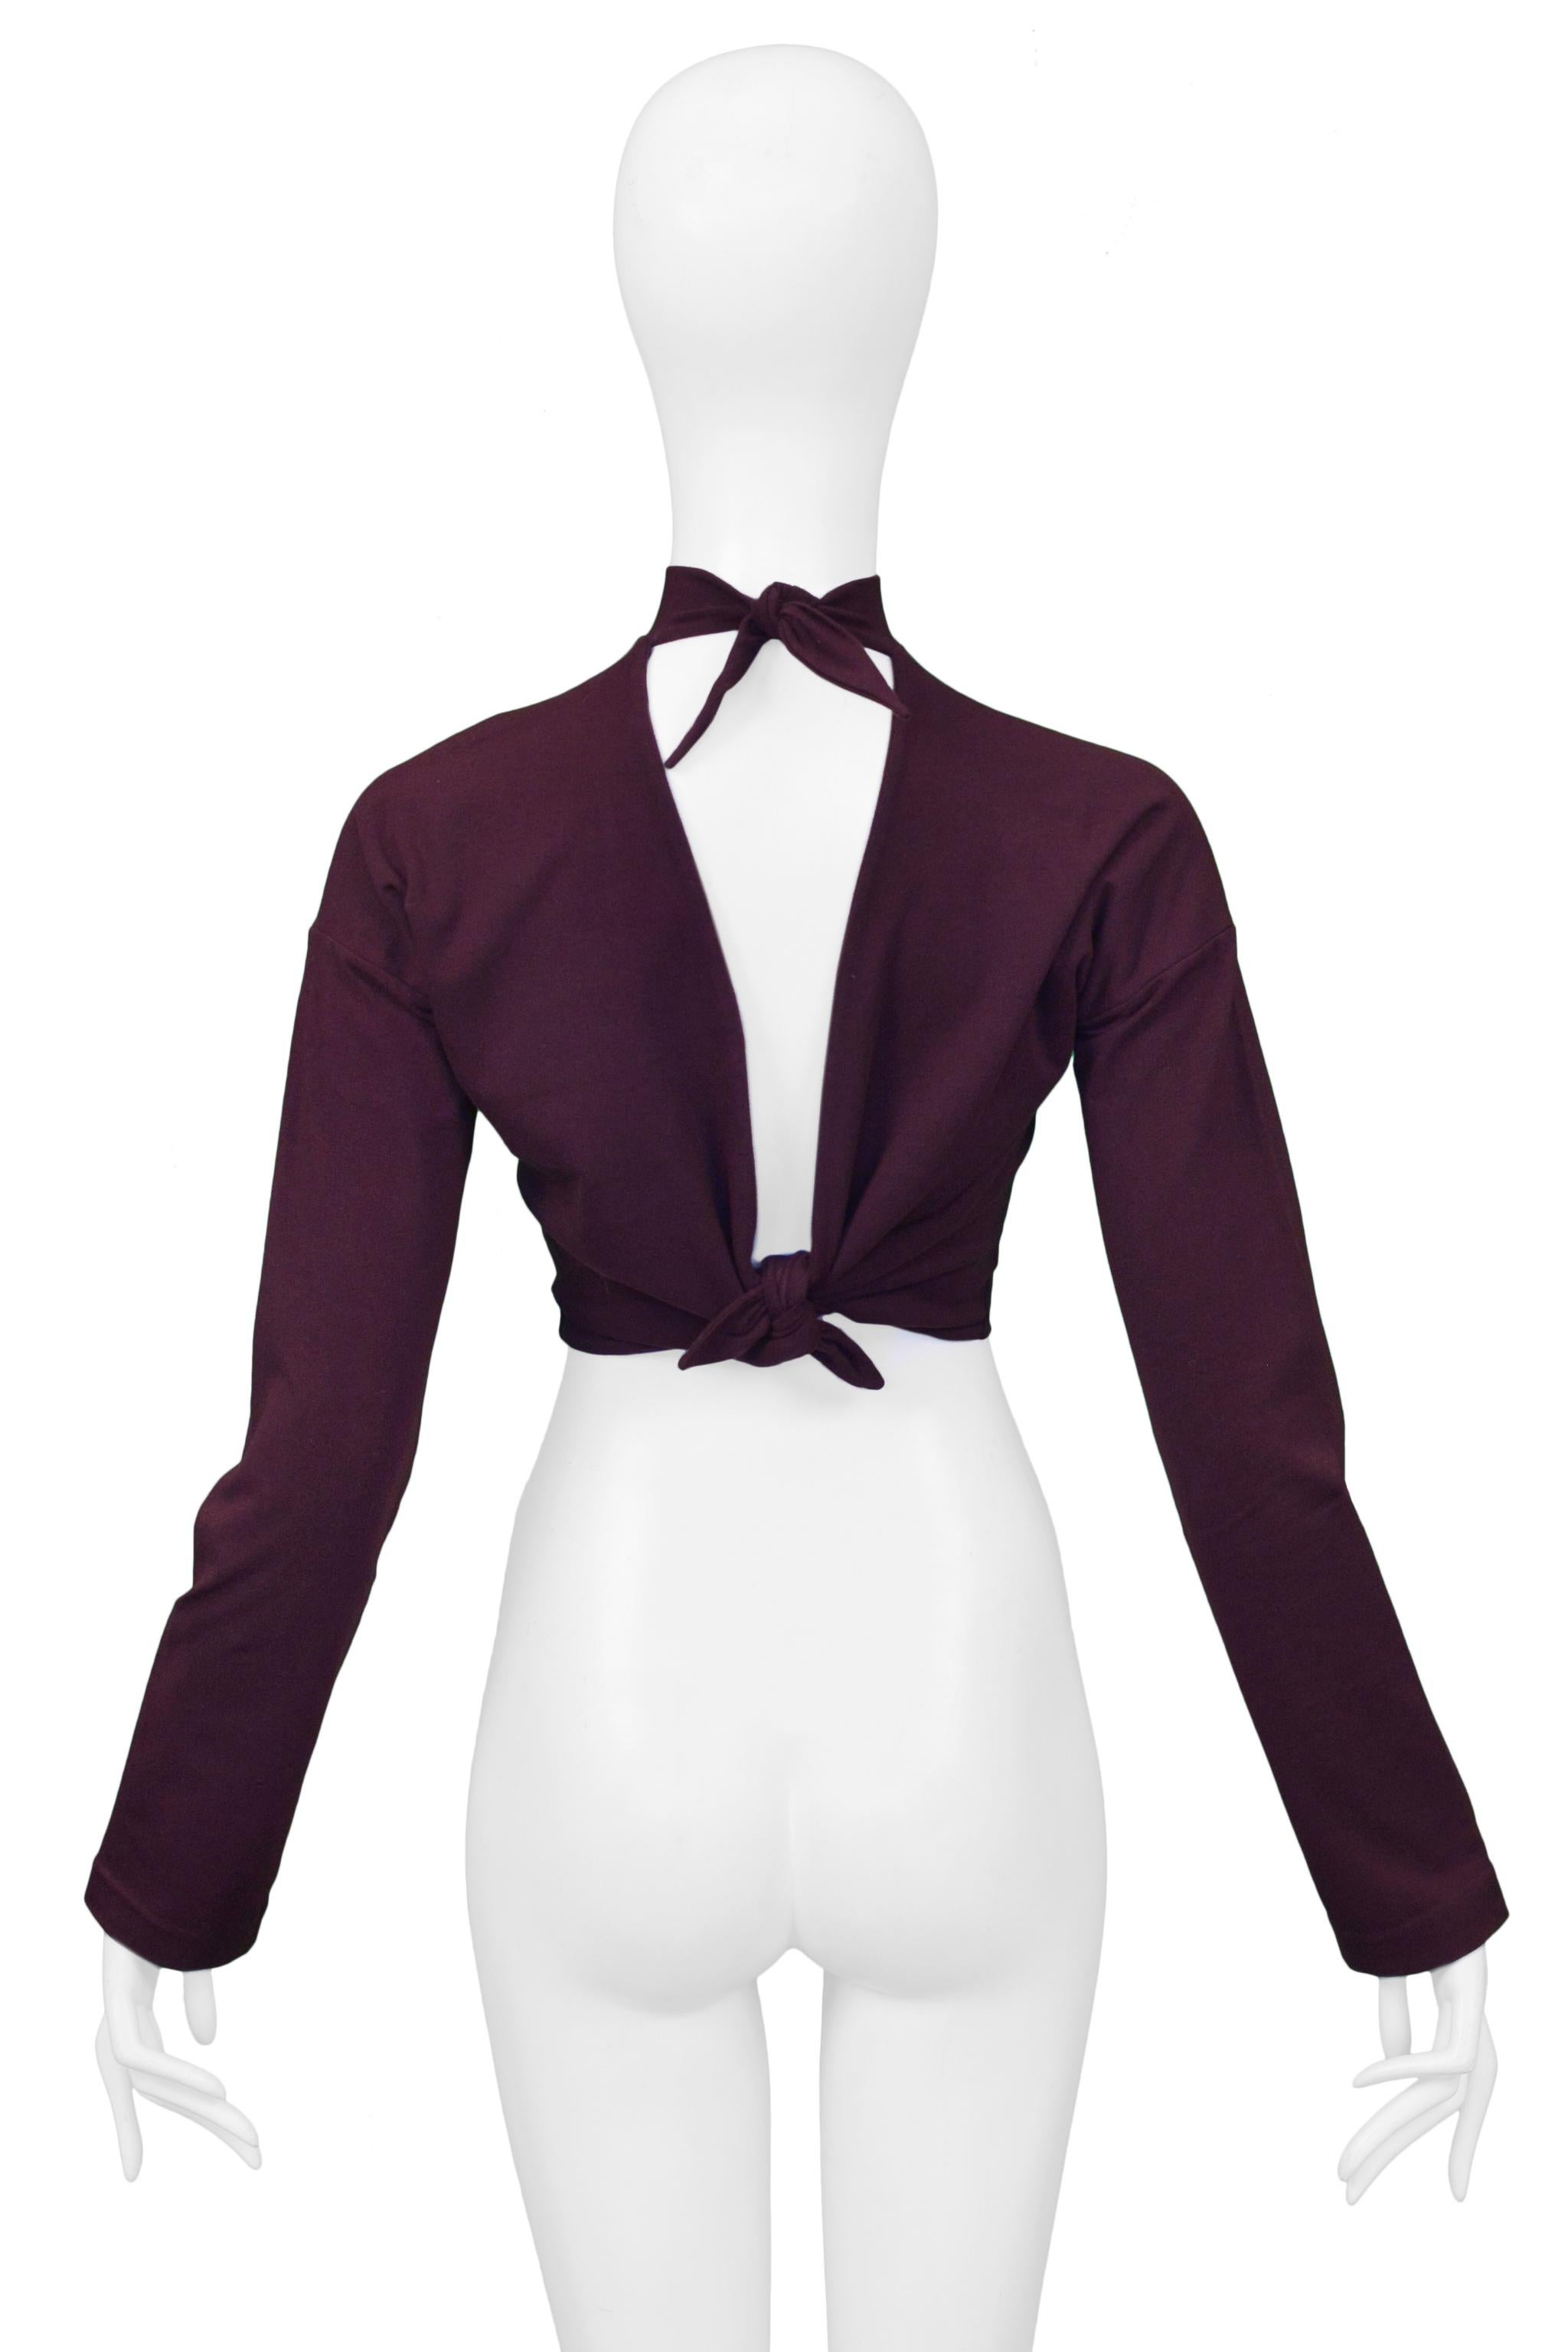 Resurrection Vintage is excited to offer a vintage Romeo Gigli dark purple top featuring long sleeves, high neck, and tie back.

Romeo Gigli
Size 42
Cotton Spandex
Excellent Vintage Condition
Authenticity Guaranteed